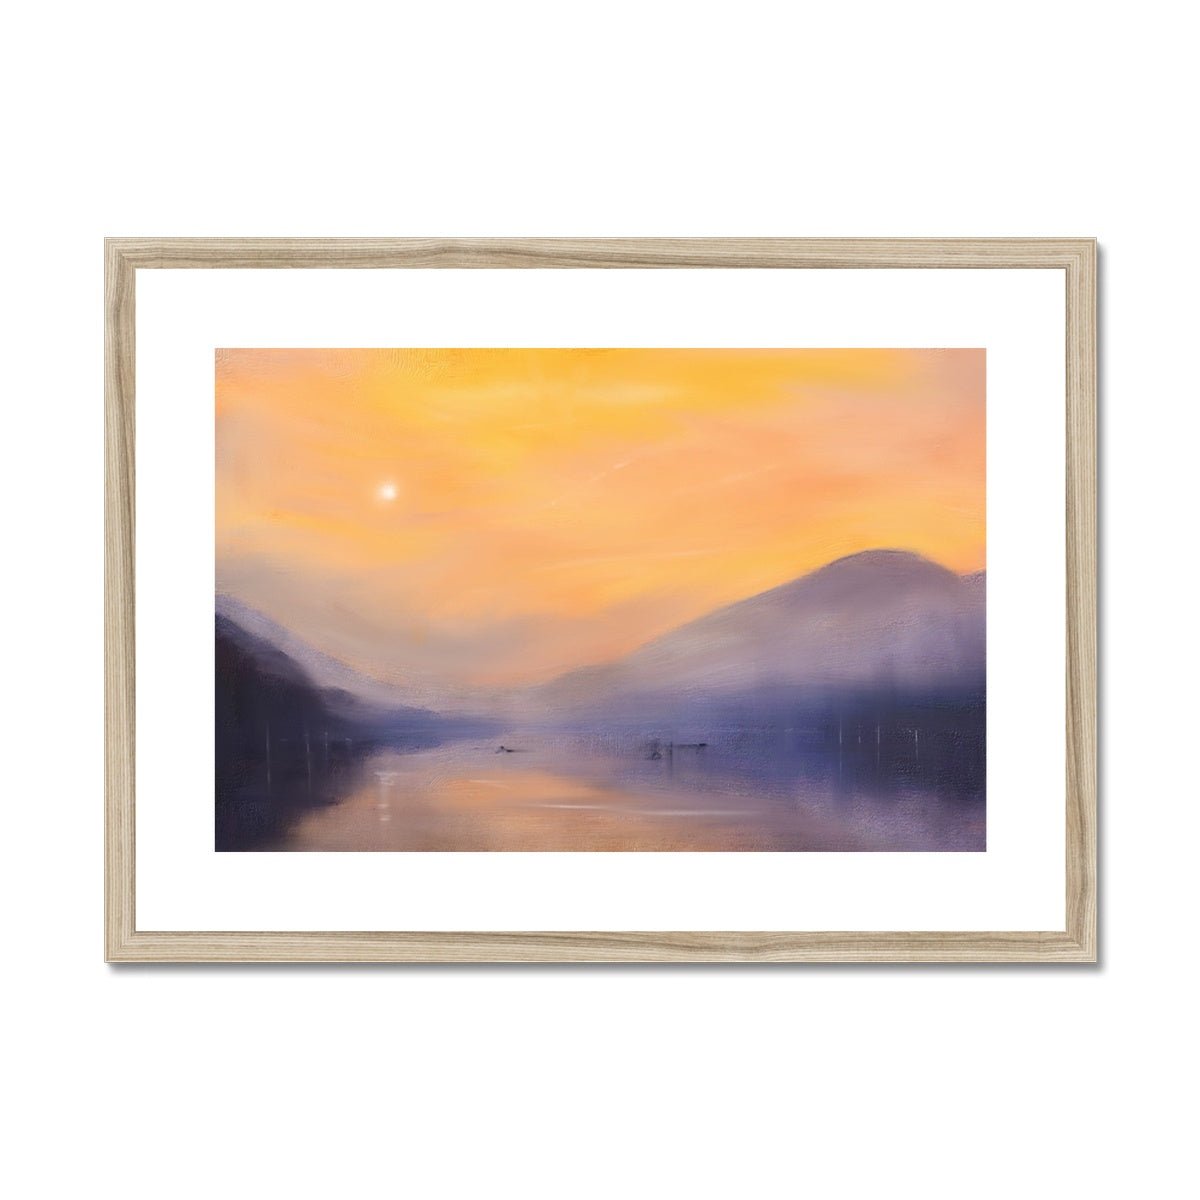 Loch Eck Dusk Painting | Framed & Mounted Prints From Scotland-Framed & Mounted Prints-Scottish Lochs & Mountains Art Gallery-A2 Landscape-Natural Frame-Paintings, Prints, Homeware, Art Gifts From Scotland By Scottish Artist Kevin Hunter